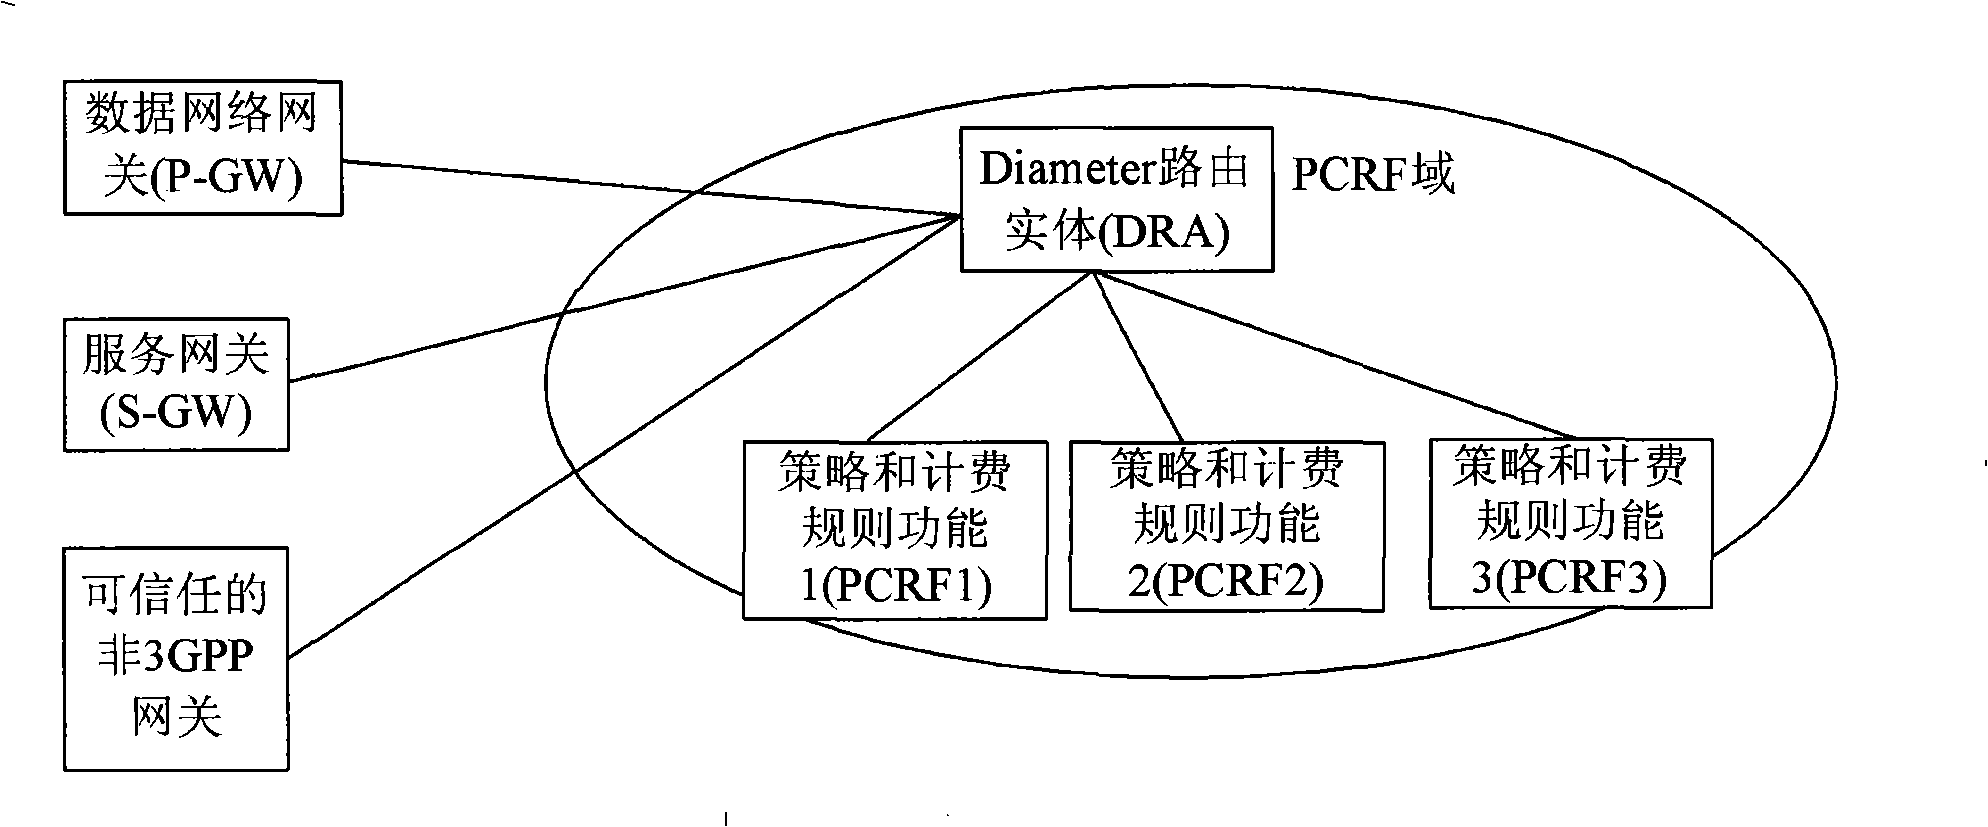 Method for forwarding message of Diameter route entity